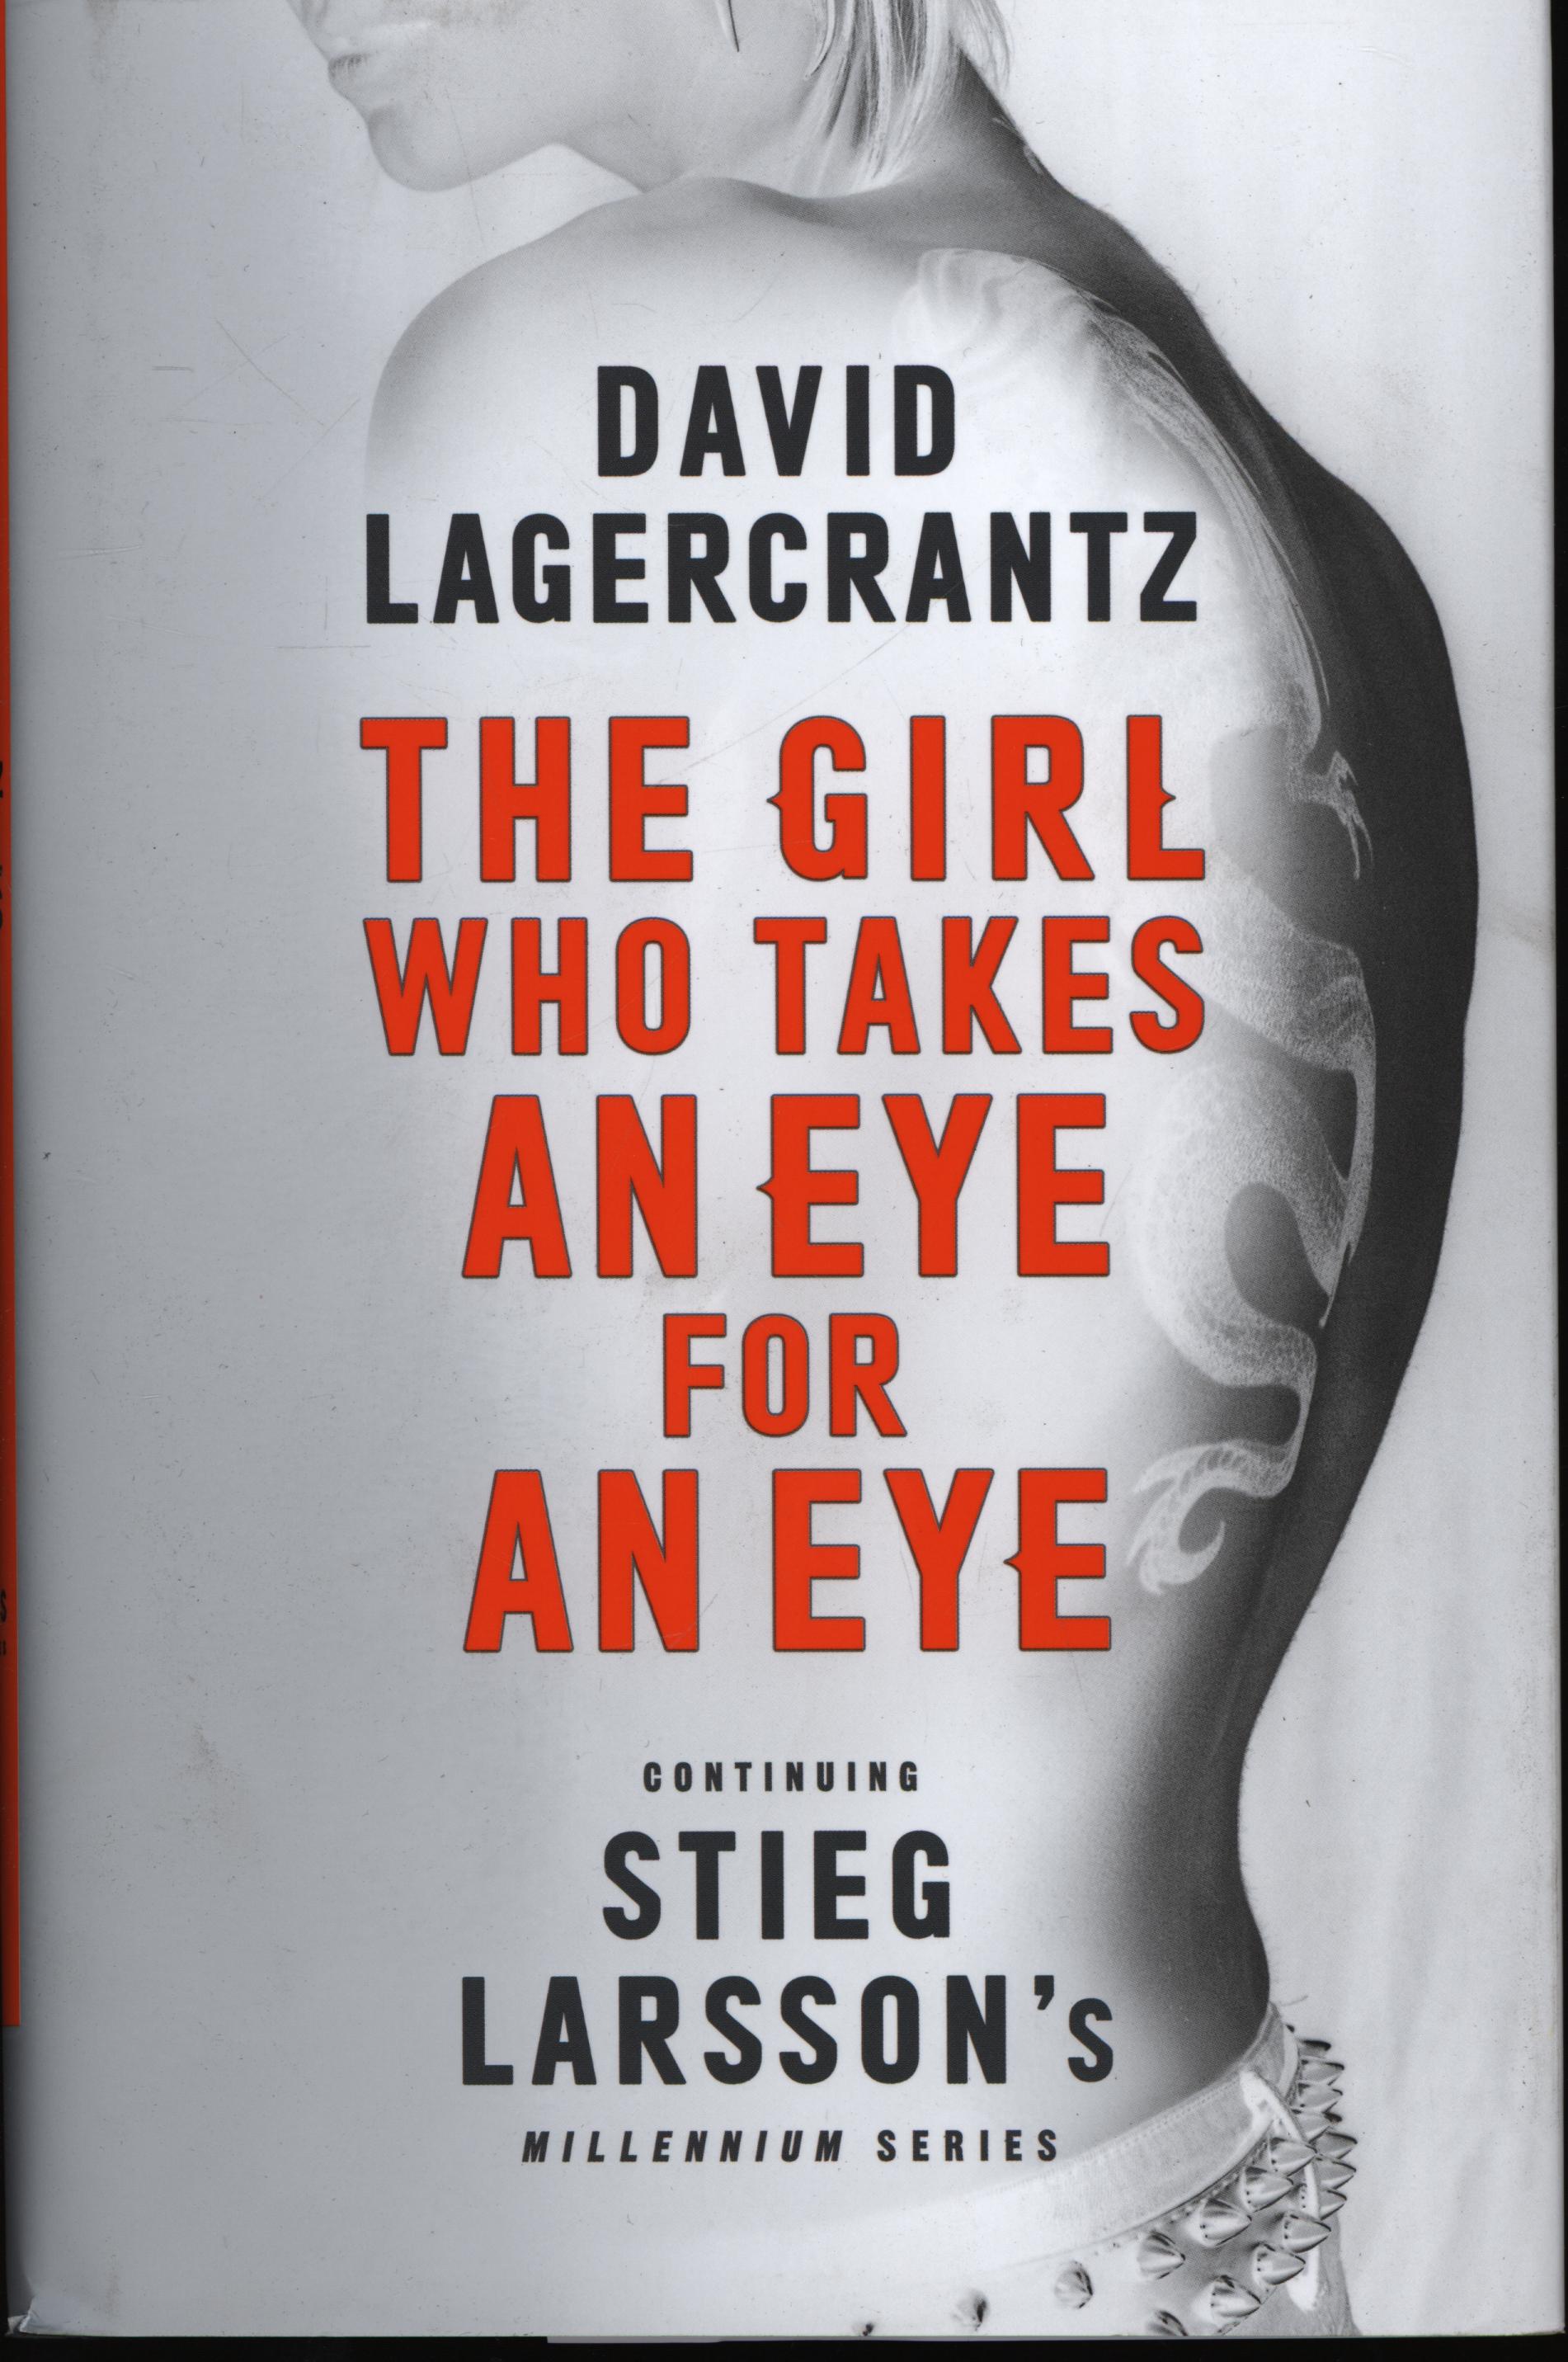 The Girl Who Takes an Eye for an Eye: Continuing Stieg Larsson's